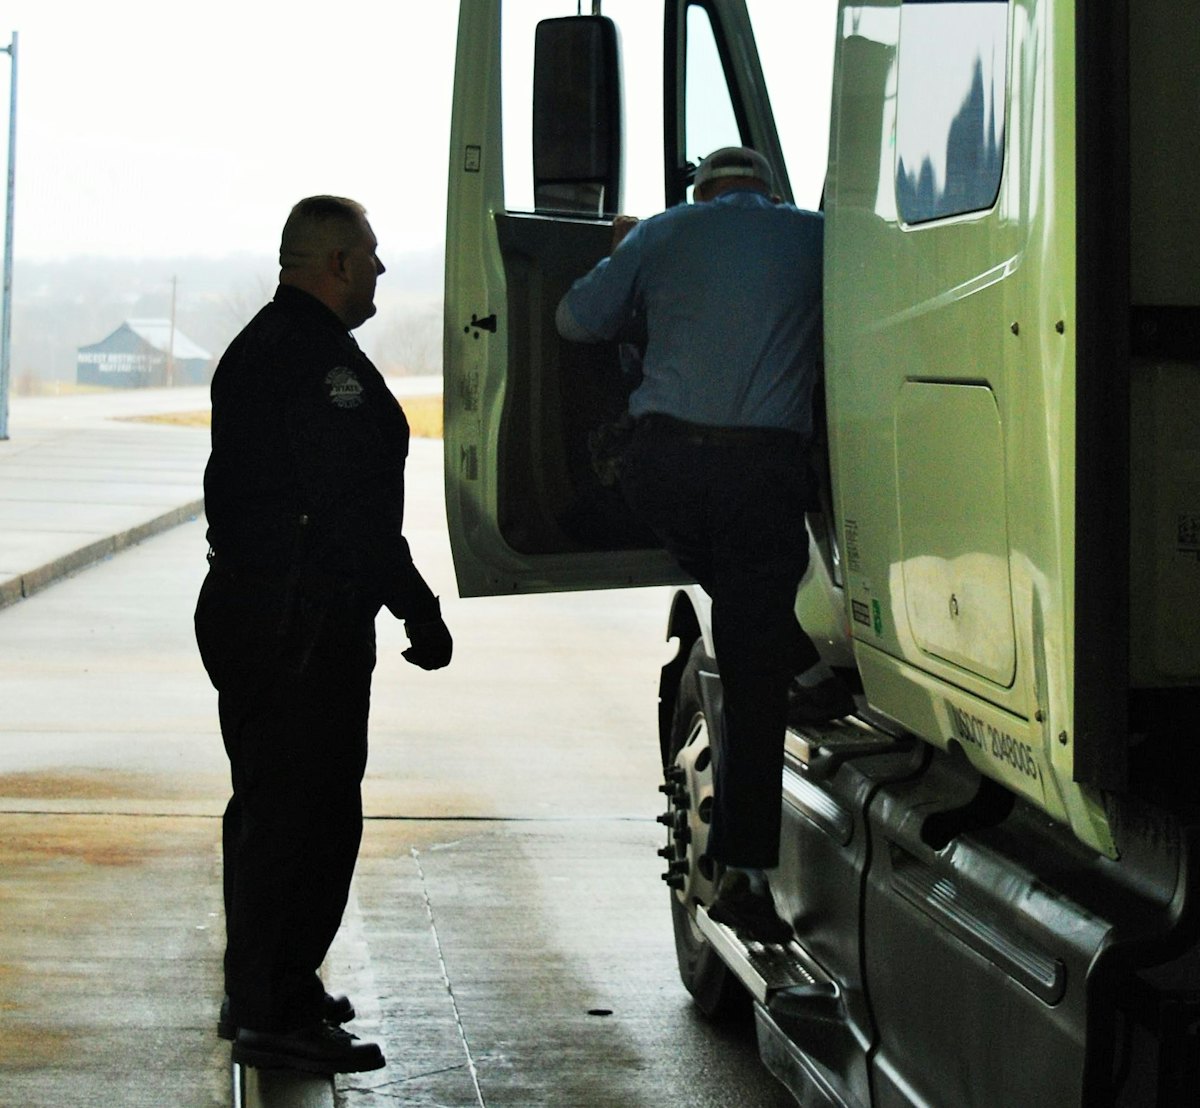 Hours-of-service becomes carriers' top concern; CSA No. 2